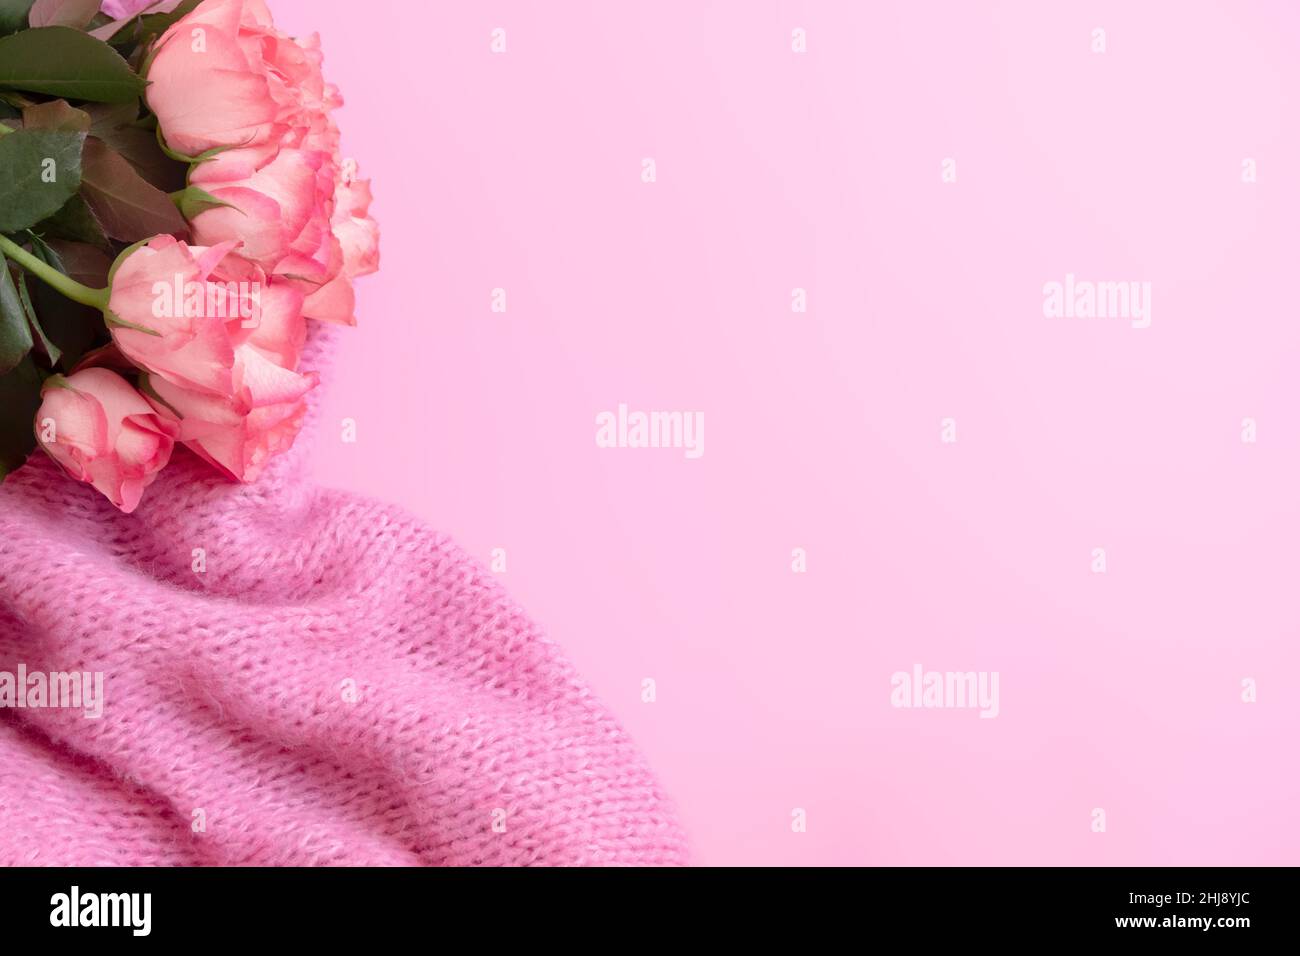 Gentle, romantic, feminine background with beautiful roses bouquet and knitted blanket on pastel pink background Stock Photo